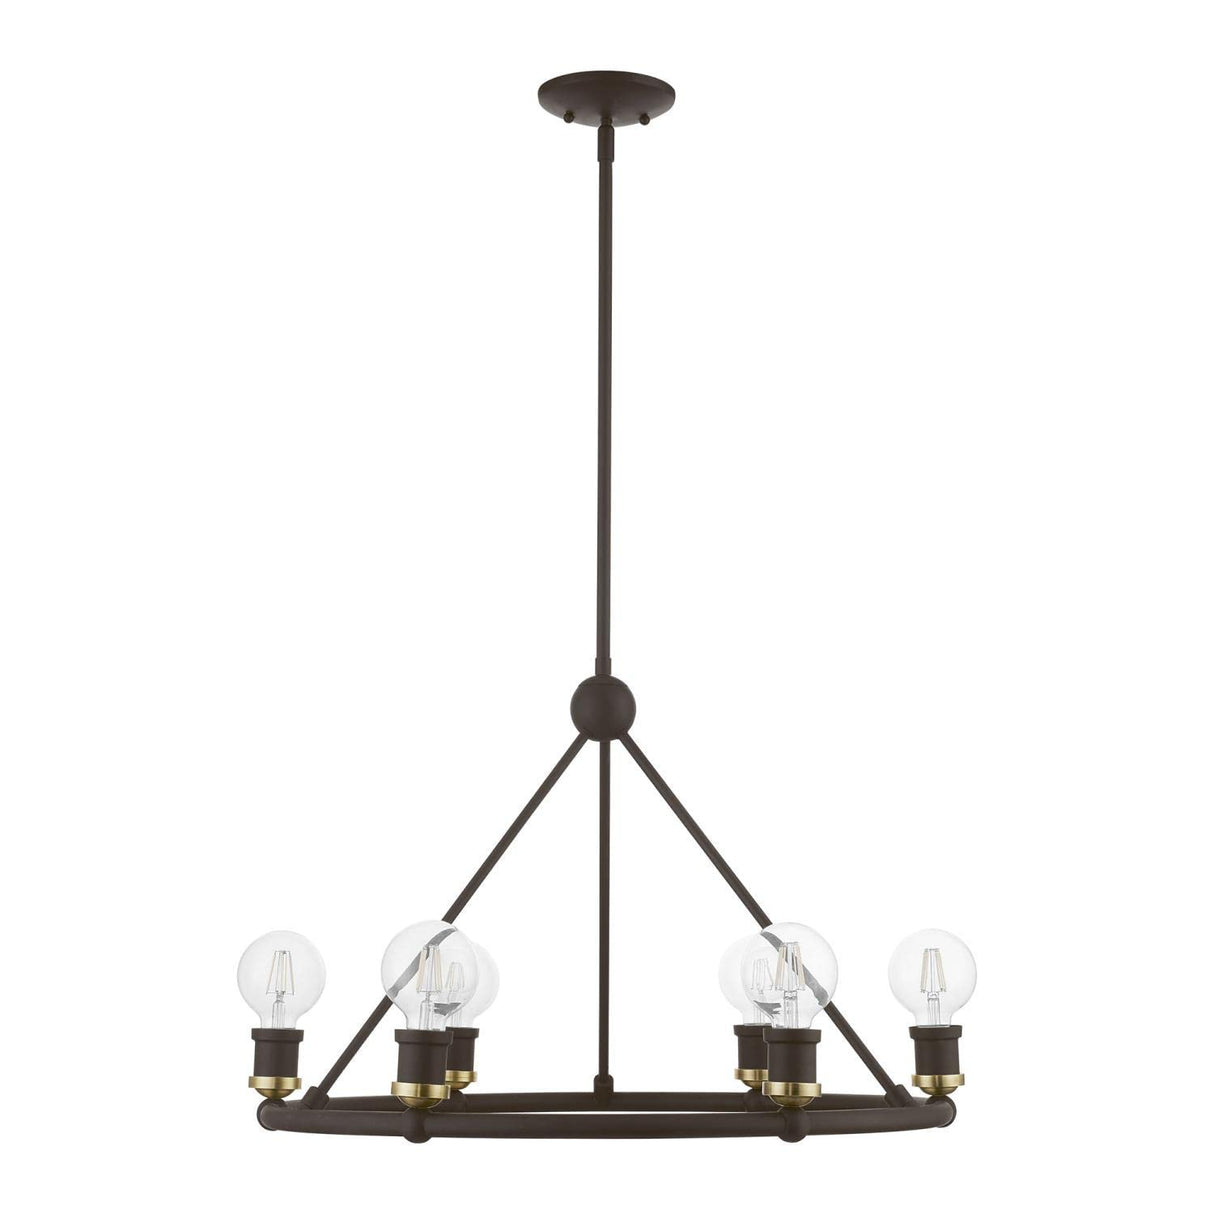 Lansdale 6 Light Chandelier in Bronze with Antique Brass (47166-07)